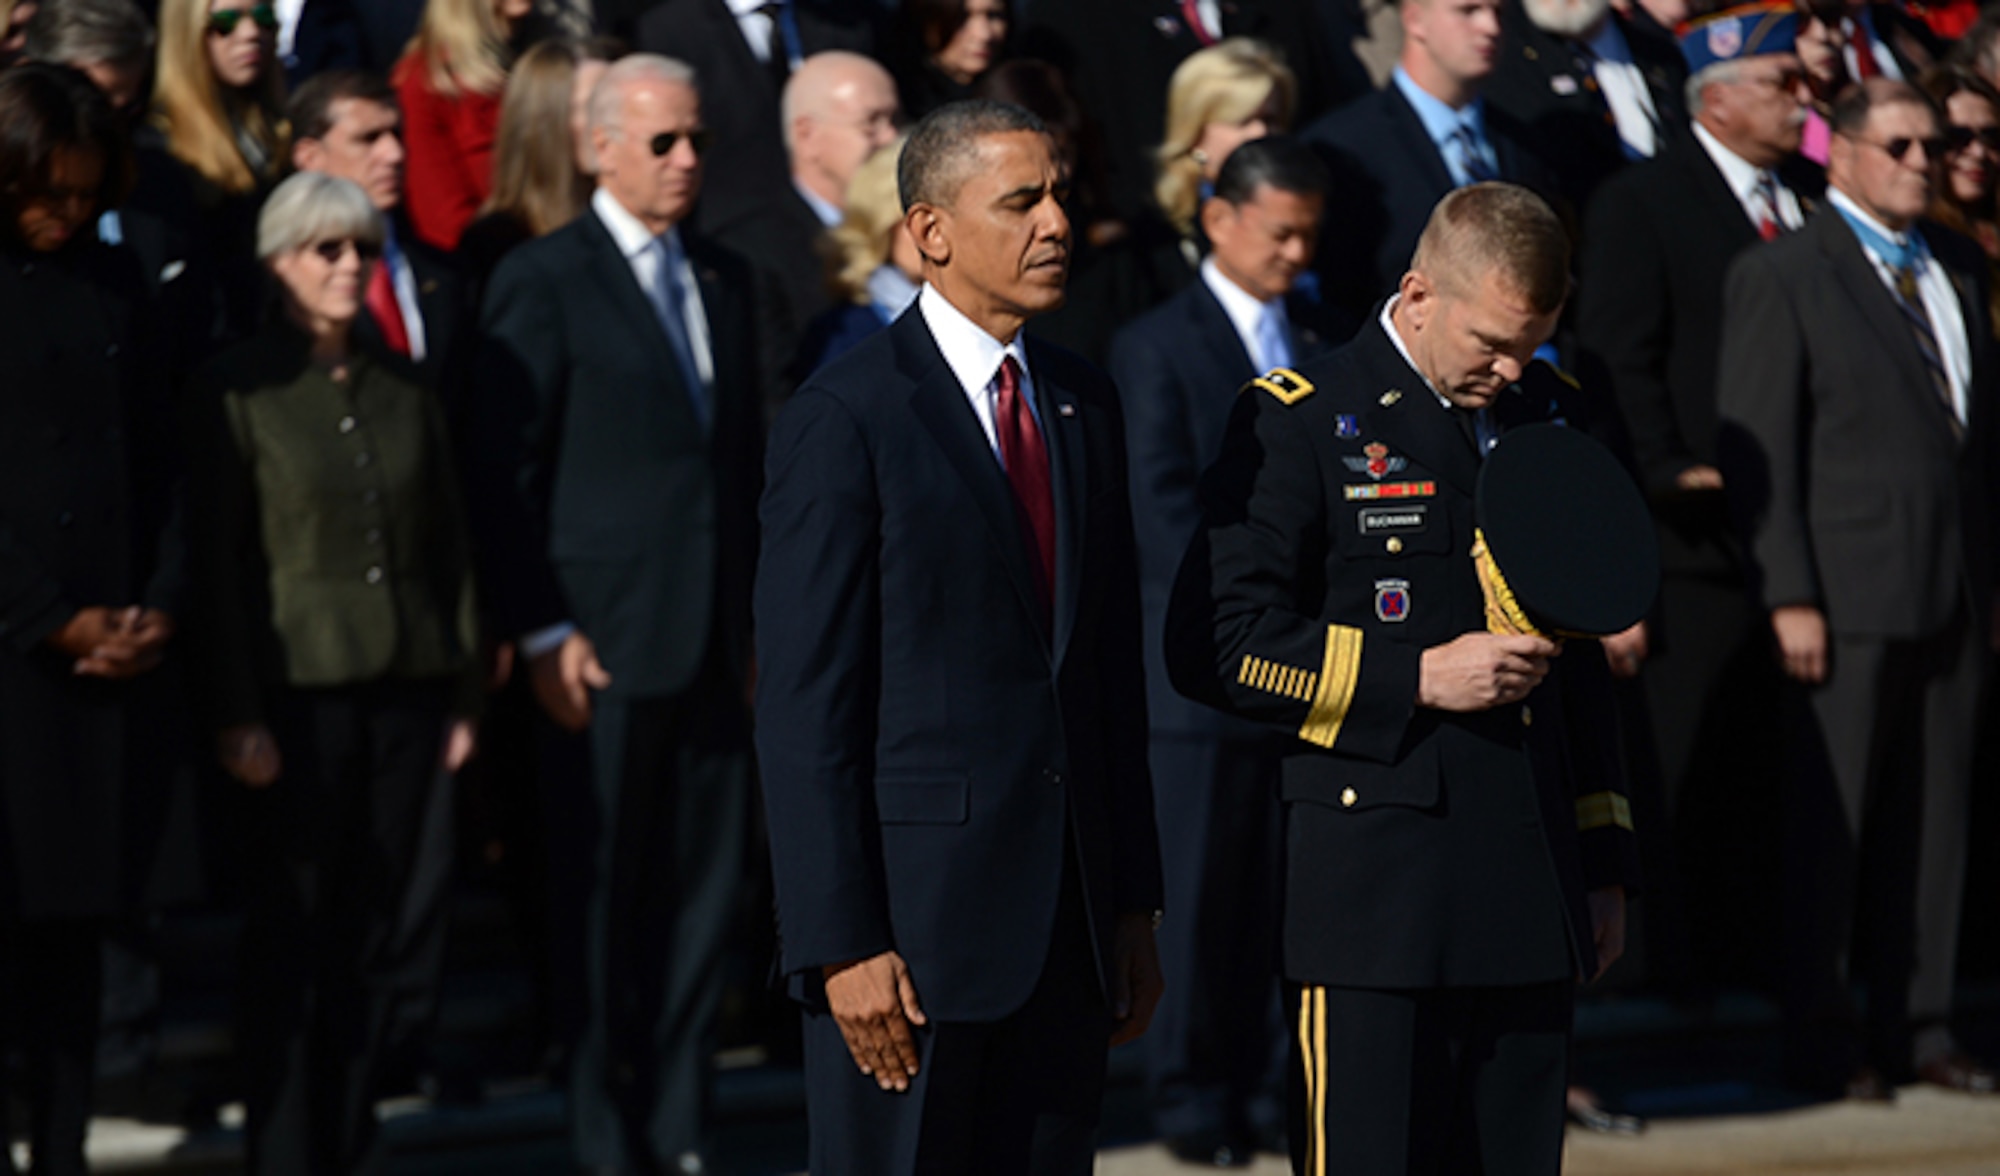 President Barack Obama, left, stands at the Tomb of the Unknown Soldier Nov. 11, 2013, while Maj. Gen. Jeffrey S. Buchanan bows his head during a Veterans Day wreath laying ceremony at Arlington National Cemetery in Arlington, Va. Buchanan is the commander of U.S. Army Military District of Washington. (Department of Defense photo/EJ Hersom)